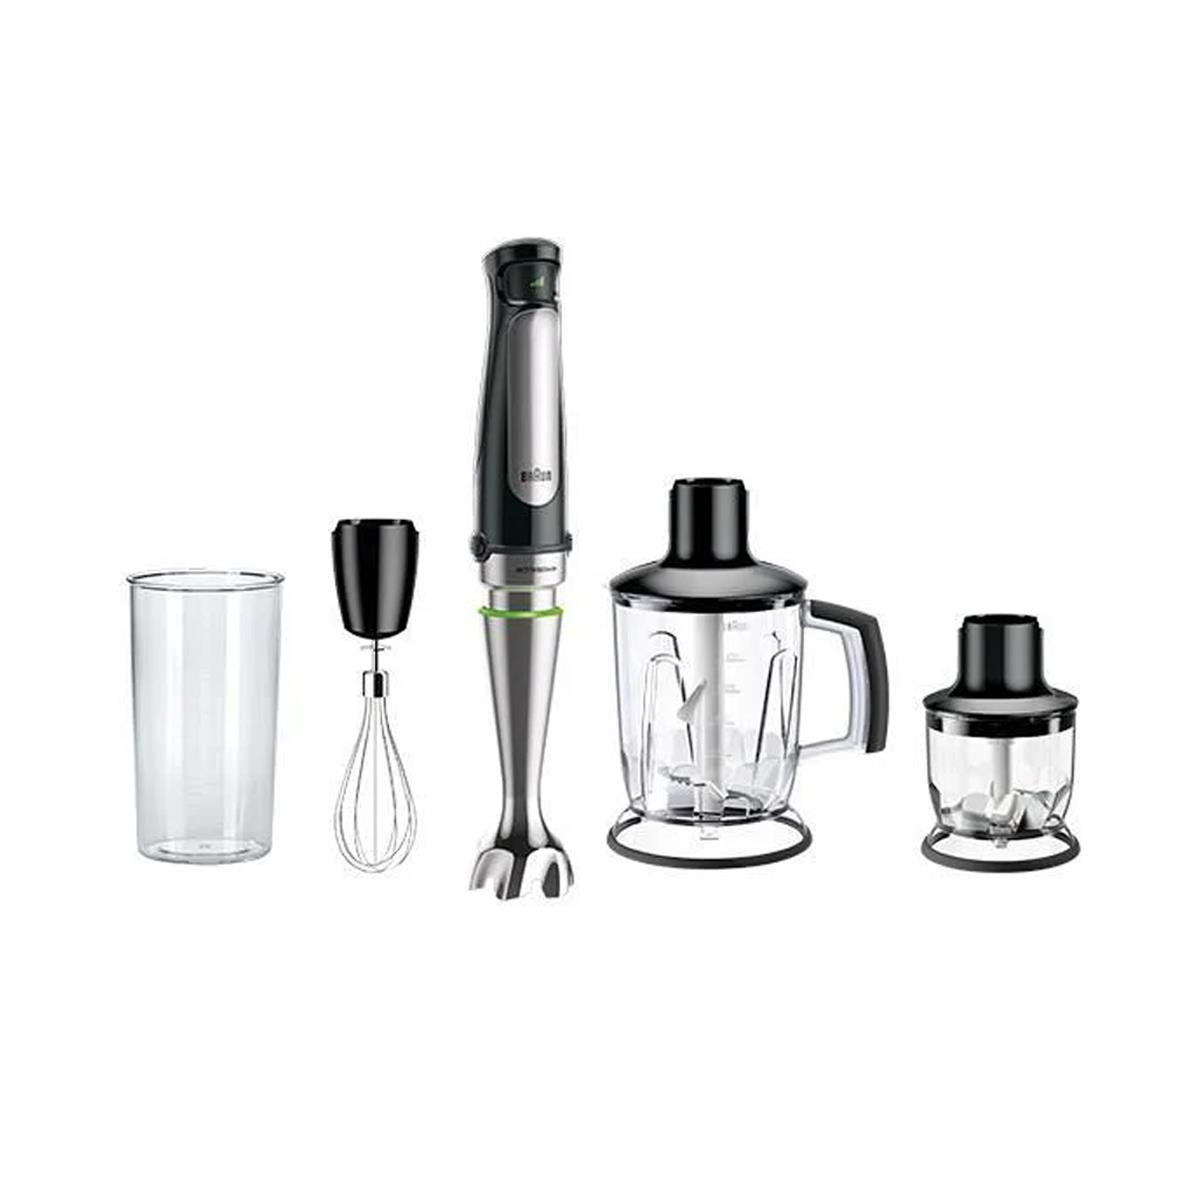 Braun MQ7 MultiQuick Hand Blender Review: Slays Every Sauce and Soup